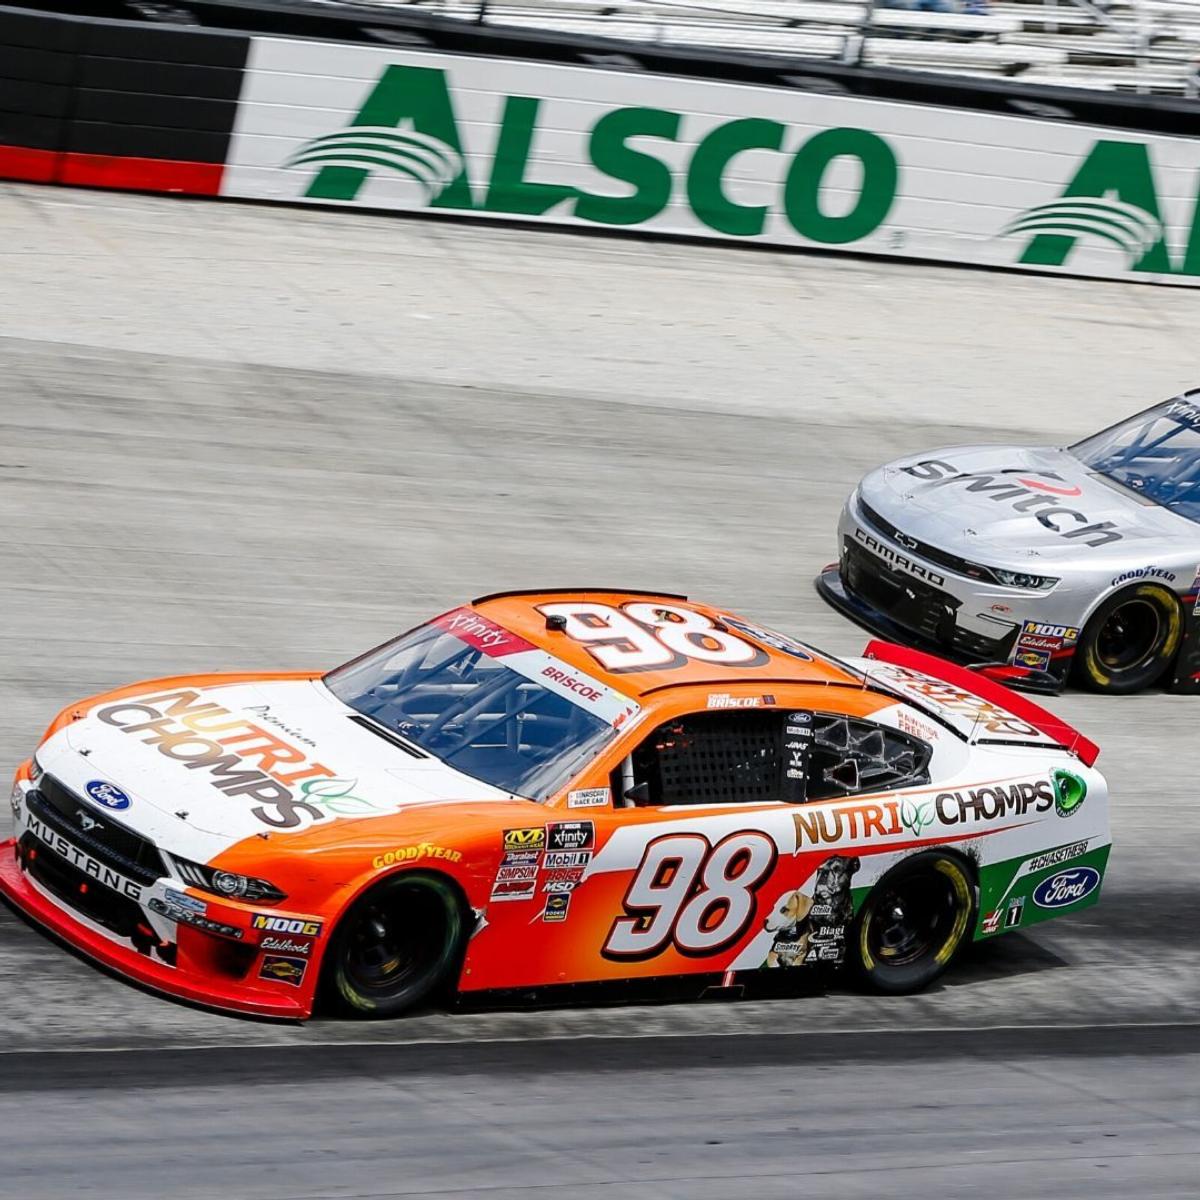 NASCAR Xfinity Series star Chase Briscoe primed for success at Cheddars 300 presented by Alsco News Media Bristol Motor Speedway